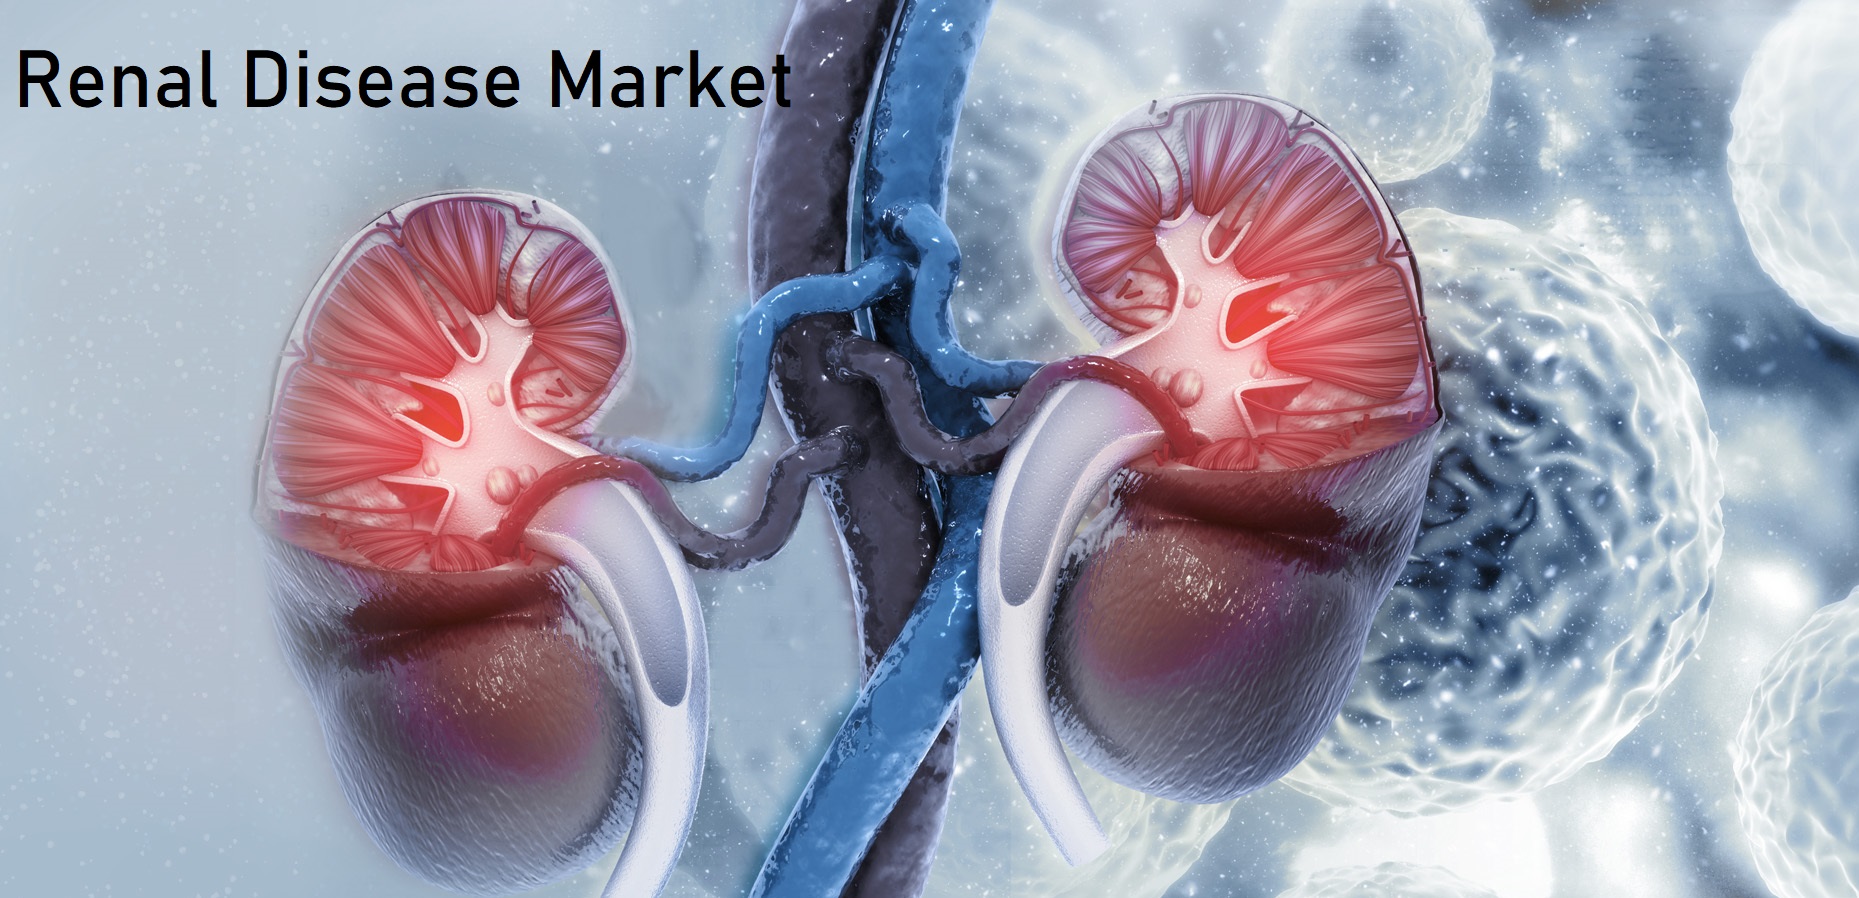 Renal Disease Market Share to Cross USD 89.07 Billion Valuation By 2030